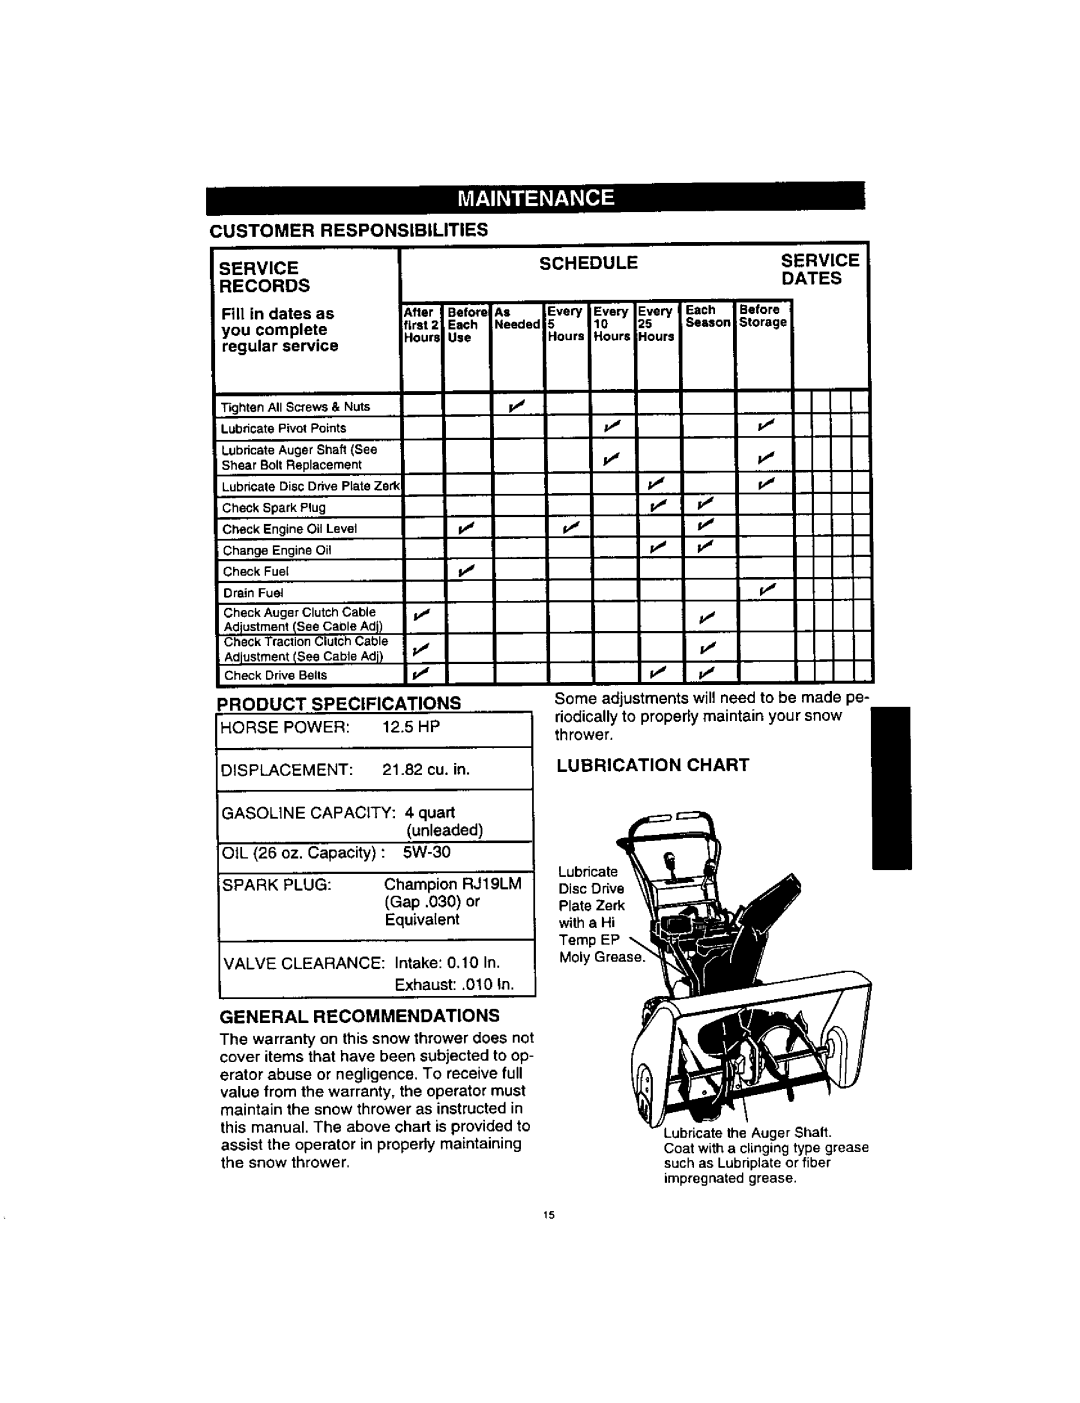 Craftsman 536.88123 Customer, Responsibilities, Service, Schedule, Dates, Records, Lubrication, Chart 